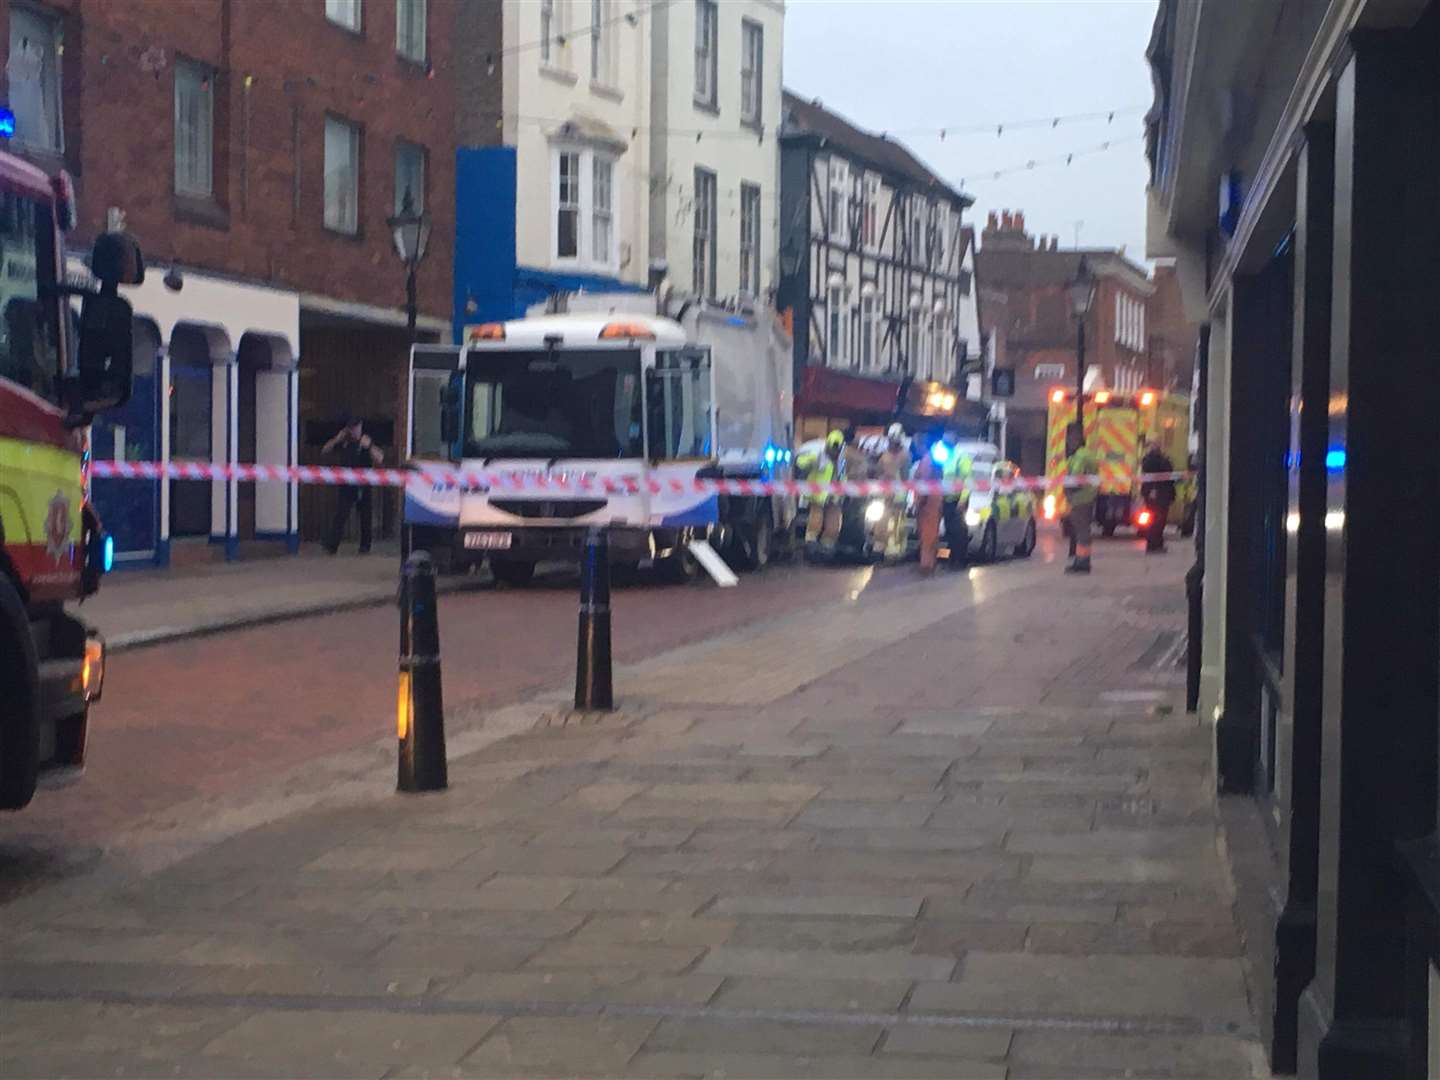 Russell Lane was trapped in a bin lorry